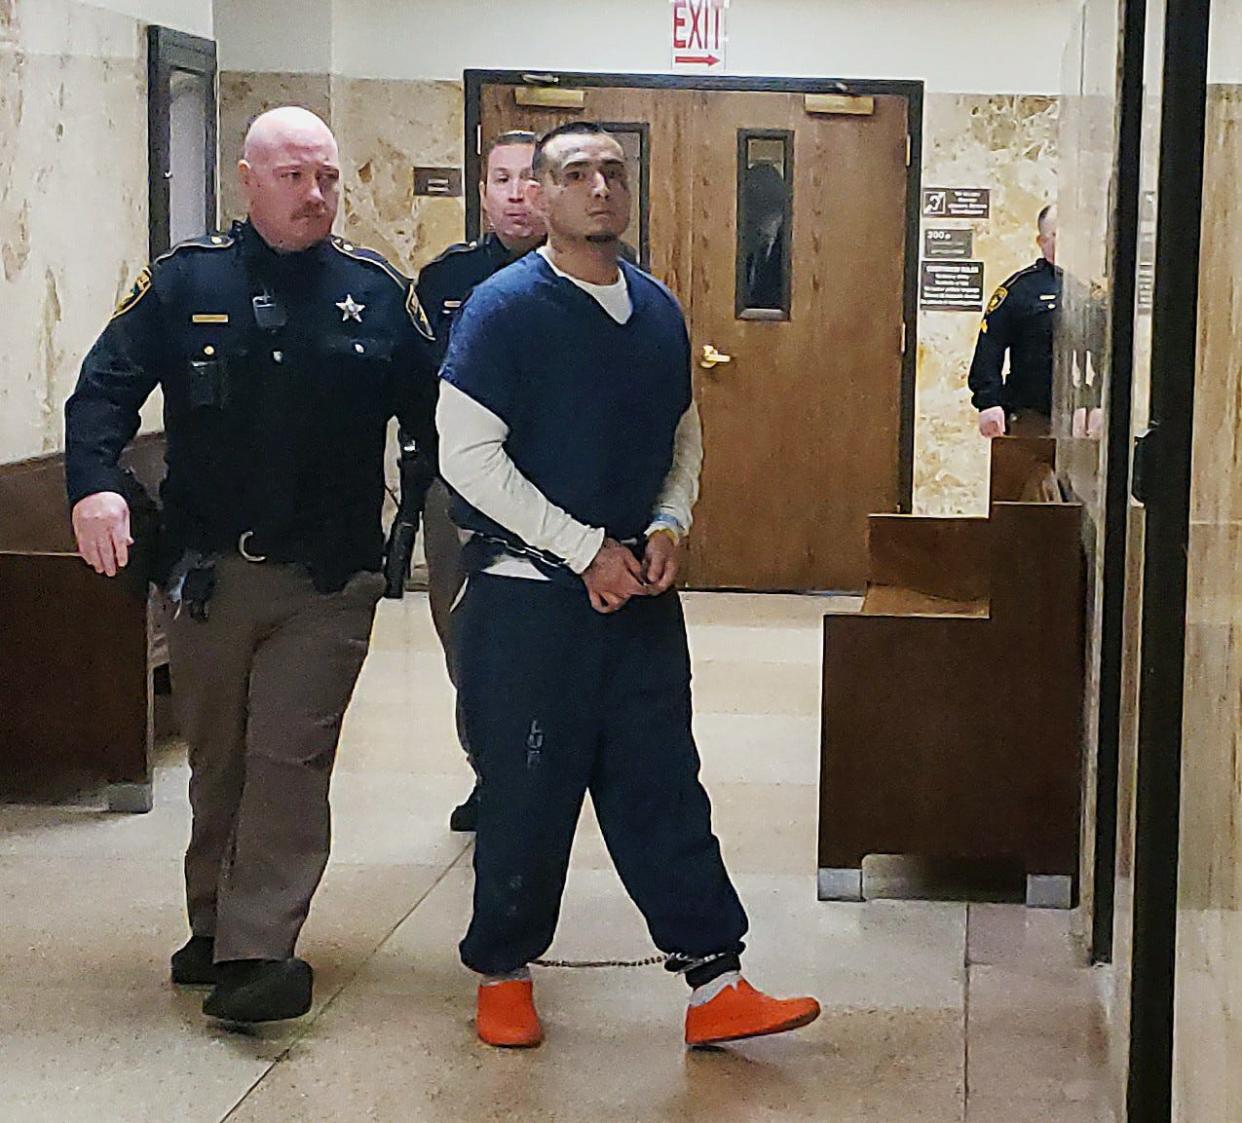 Isaiah Sanchez walks out of the 137th District Court where he was sentenced to 40 years in prison for the December 2020 shooting death of Monica Lumbrera.